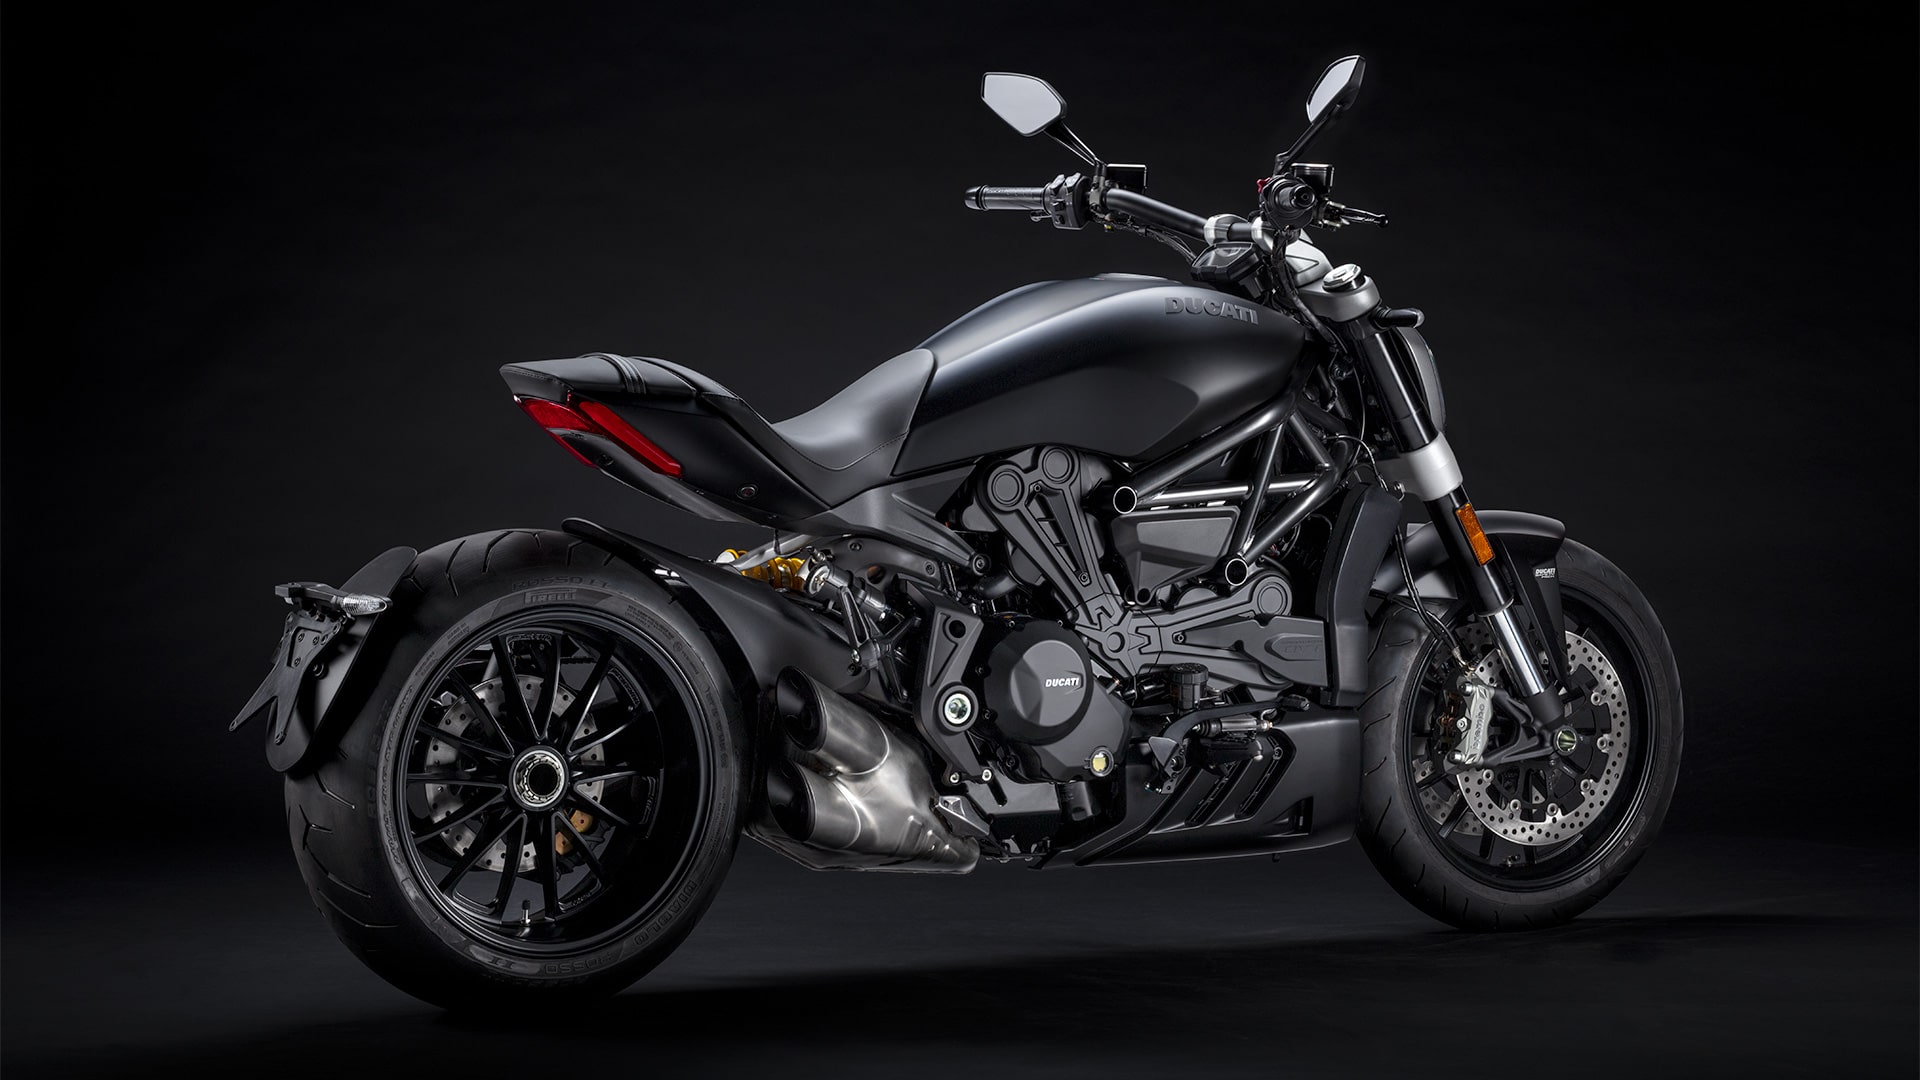 Supersport, Monster, XDiavel Bikes Recalled by Ducati